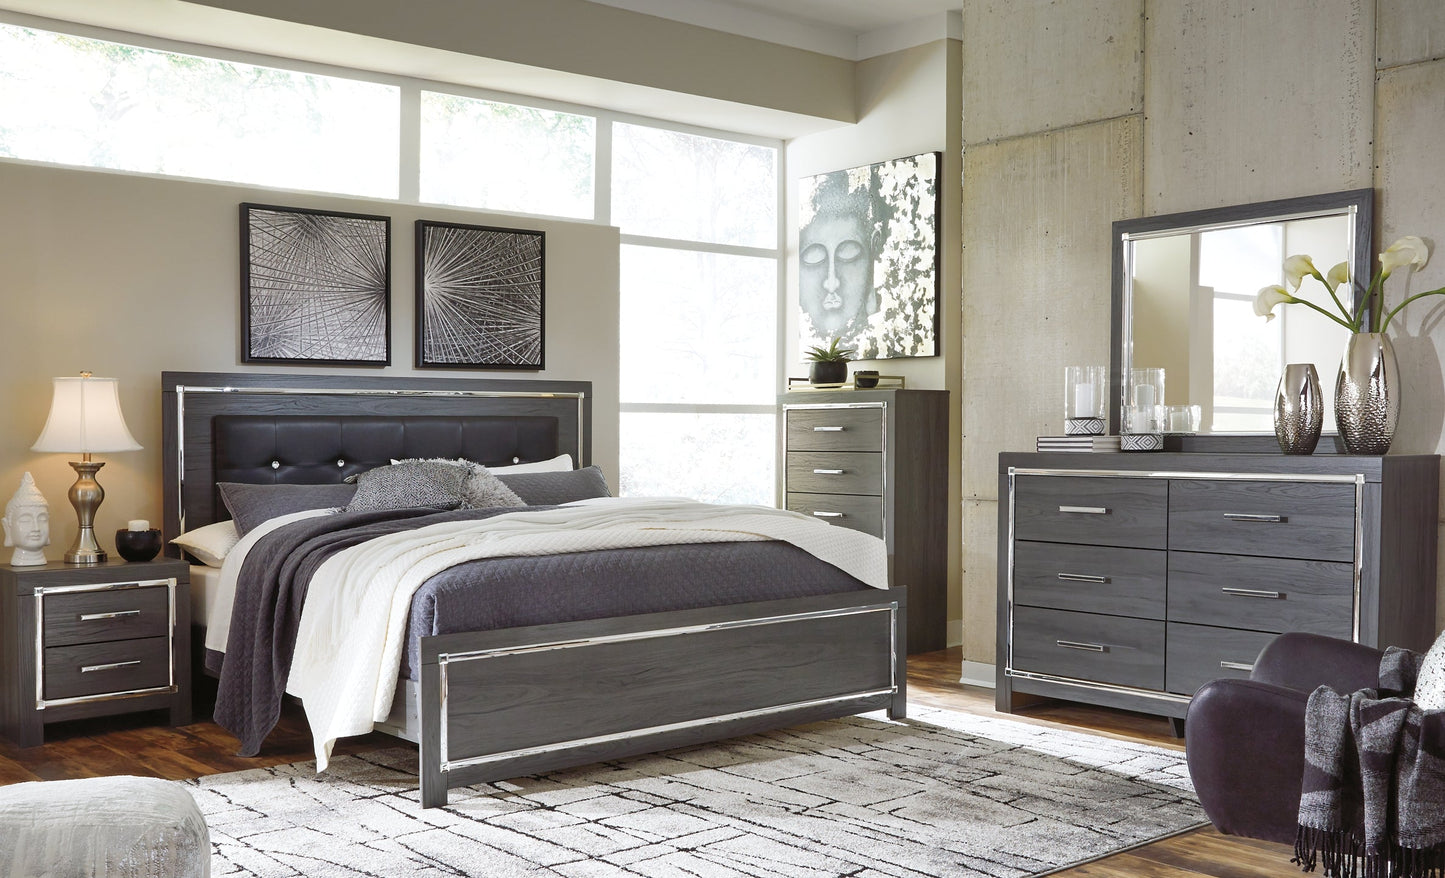 Lodanna Queen Panel Bed at Walker Mattress and Furniture Locations in Cedar Park and Belton TX.